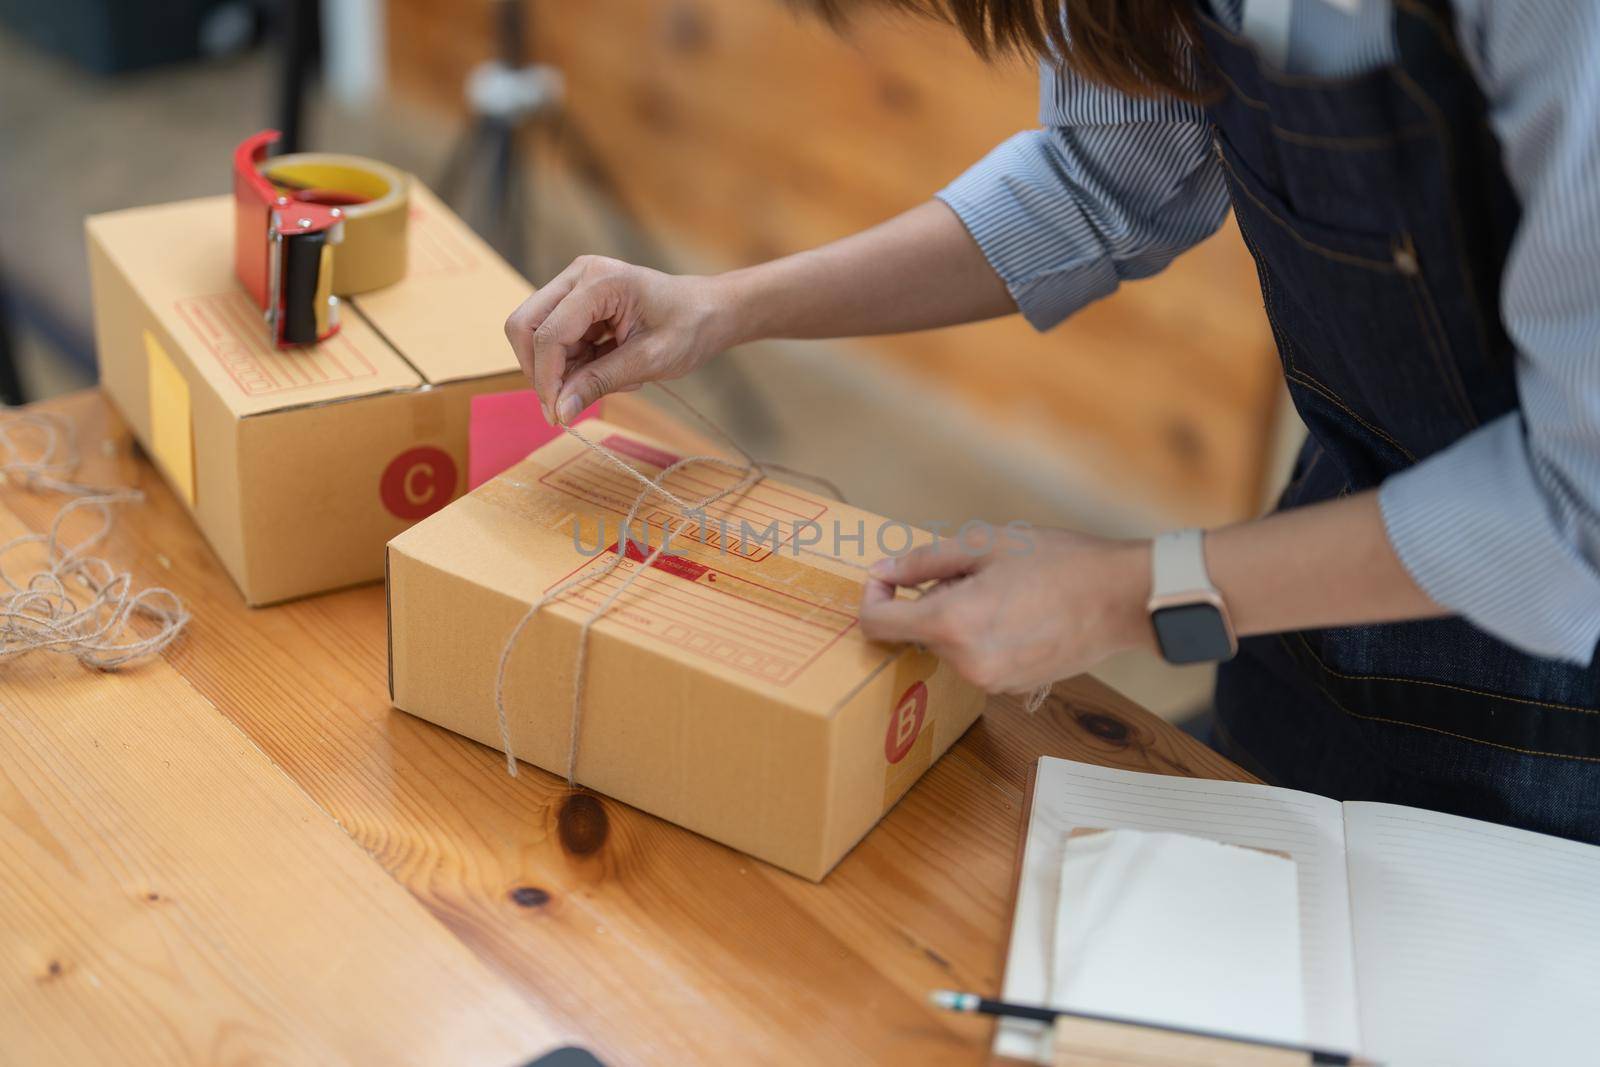 Young small business owner packing deliveries in modern office and storage space.